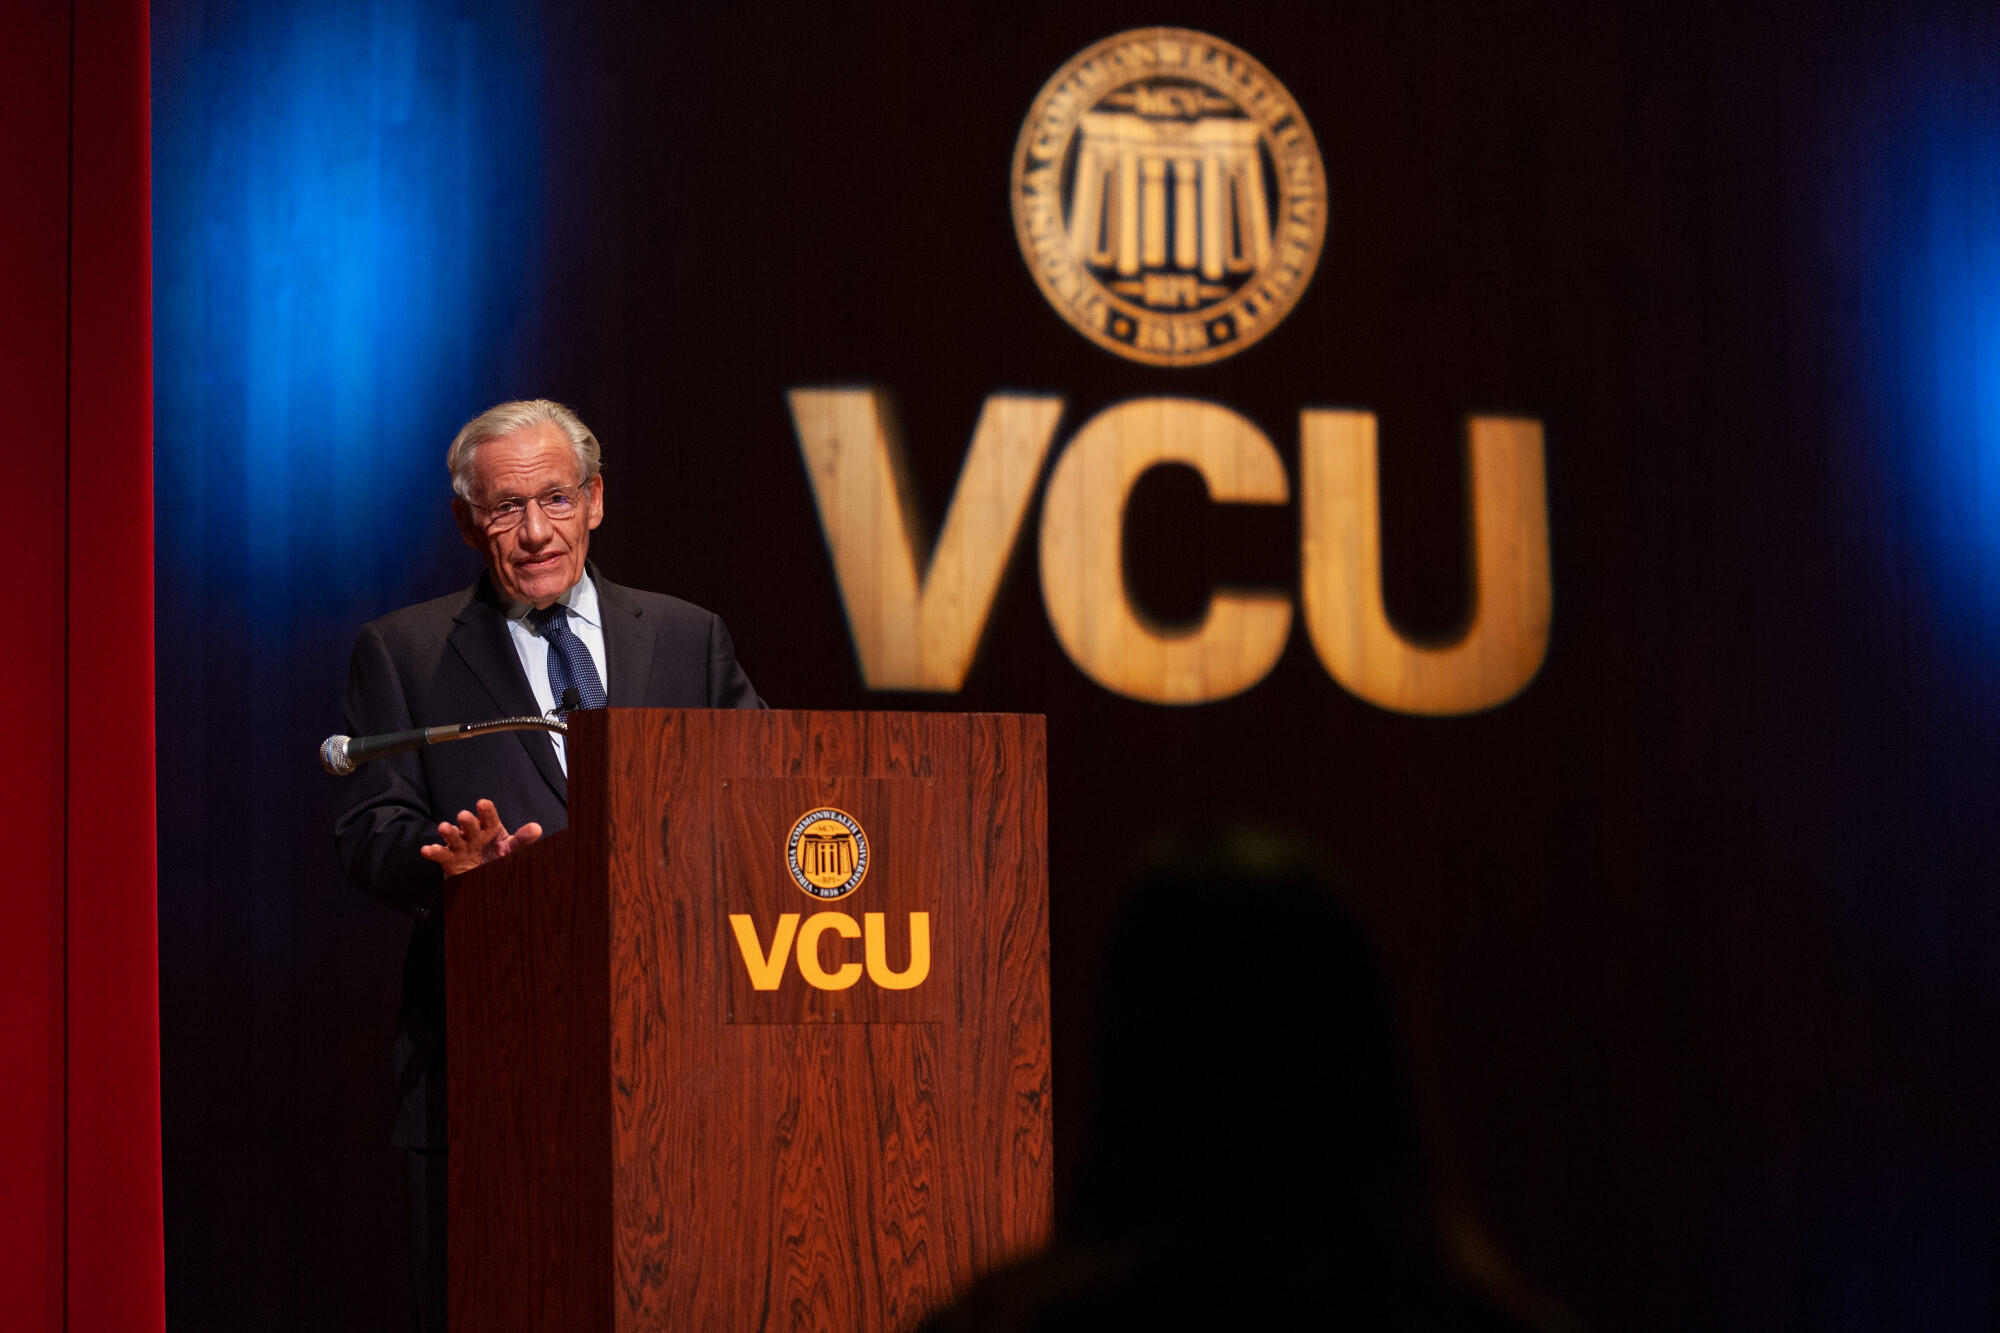 Woodward, whose books famously rely on anonymous or deep background sources, defended the use of unnamed sources in journalism. “I think we need more. Not off the record, we need deep background or background sources,” he said. “Because then you can get the truth. Too many lies on the record.” (Photo by Kevin Morley, University Relations)